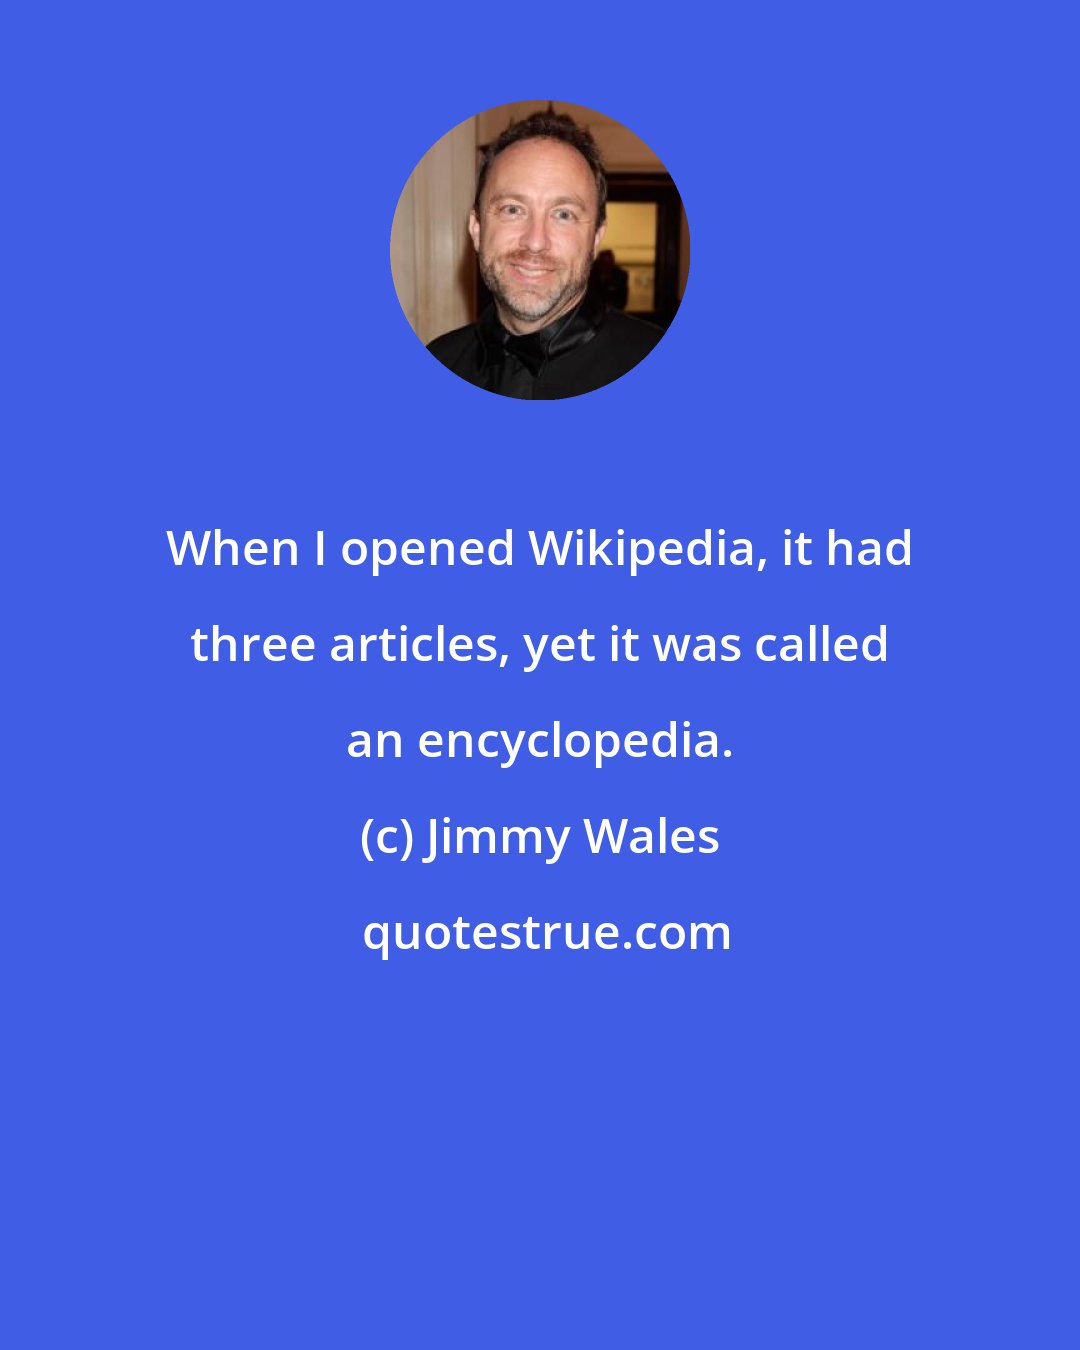 Jimmy Wales: When I opened Wikipedia, it had three articles, yet it was called an encyclopedia.